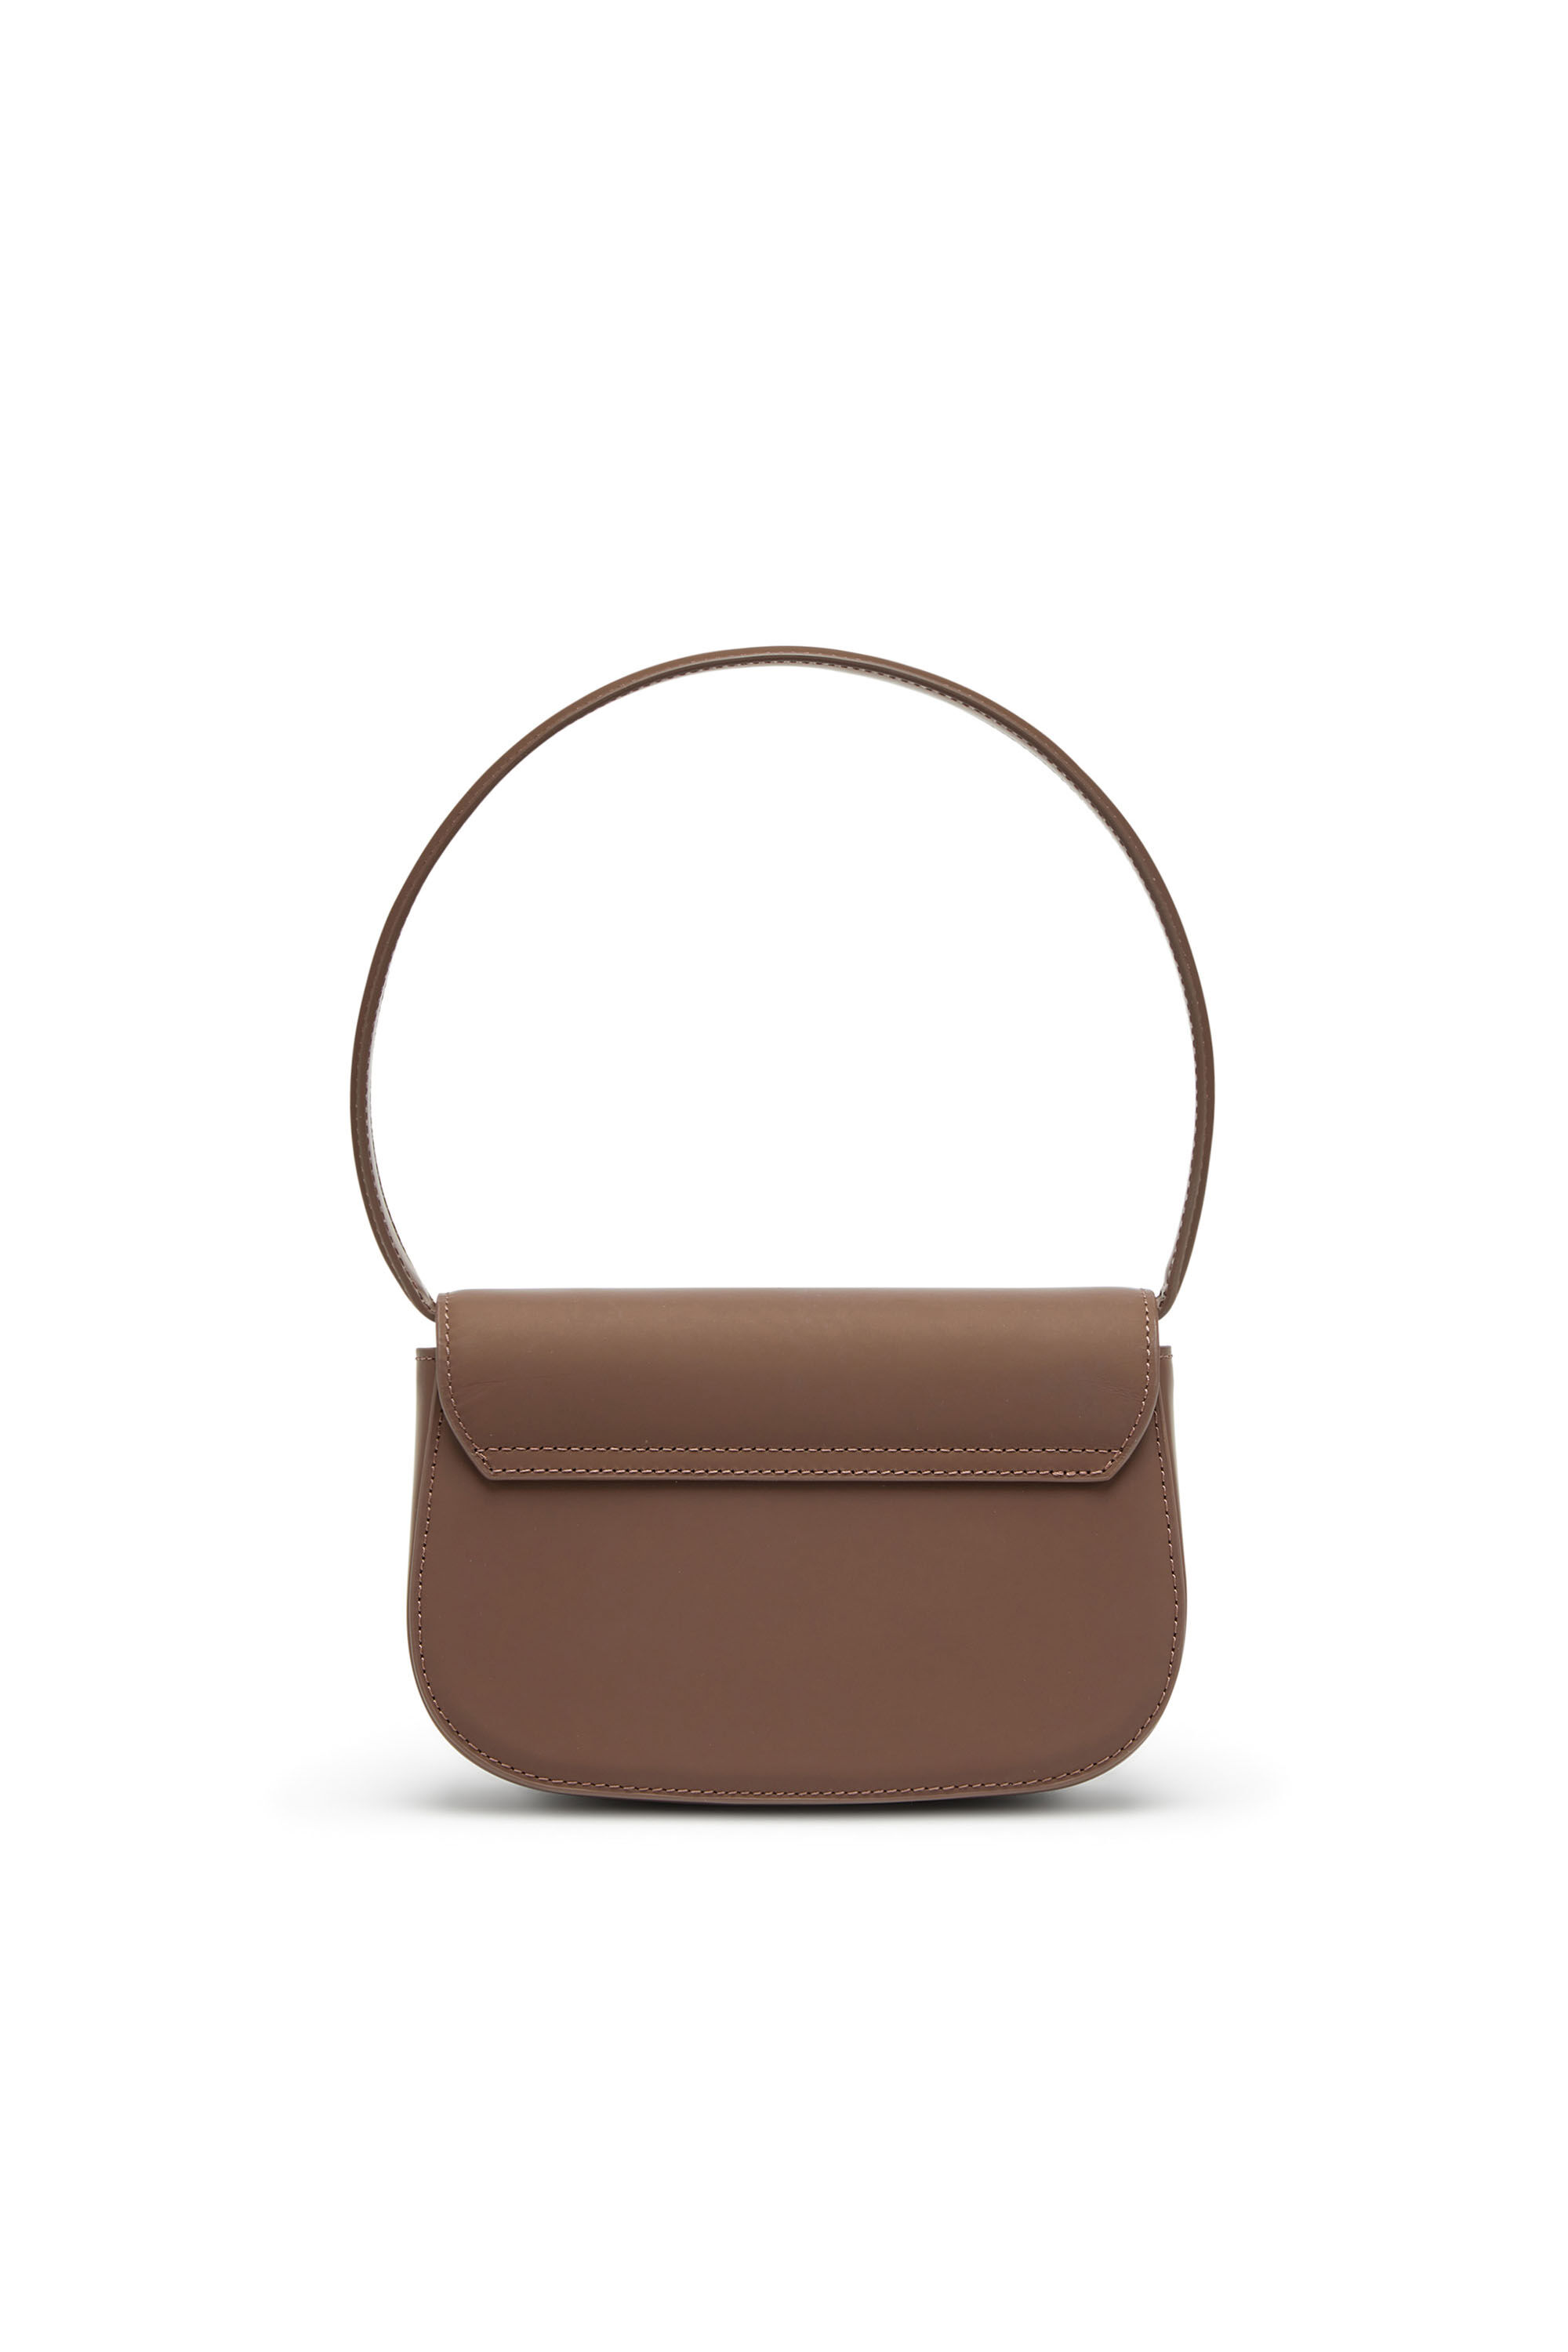 Diesel - 1DR, Woman 1DR-Iconic shoulder bag in matte leather in Brown - Image 3